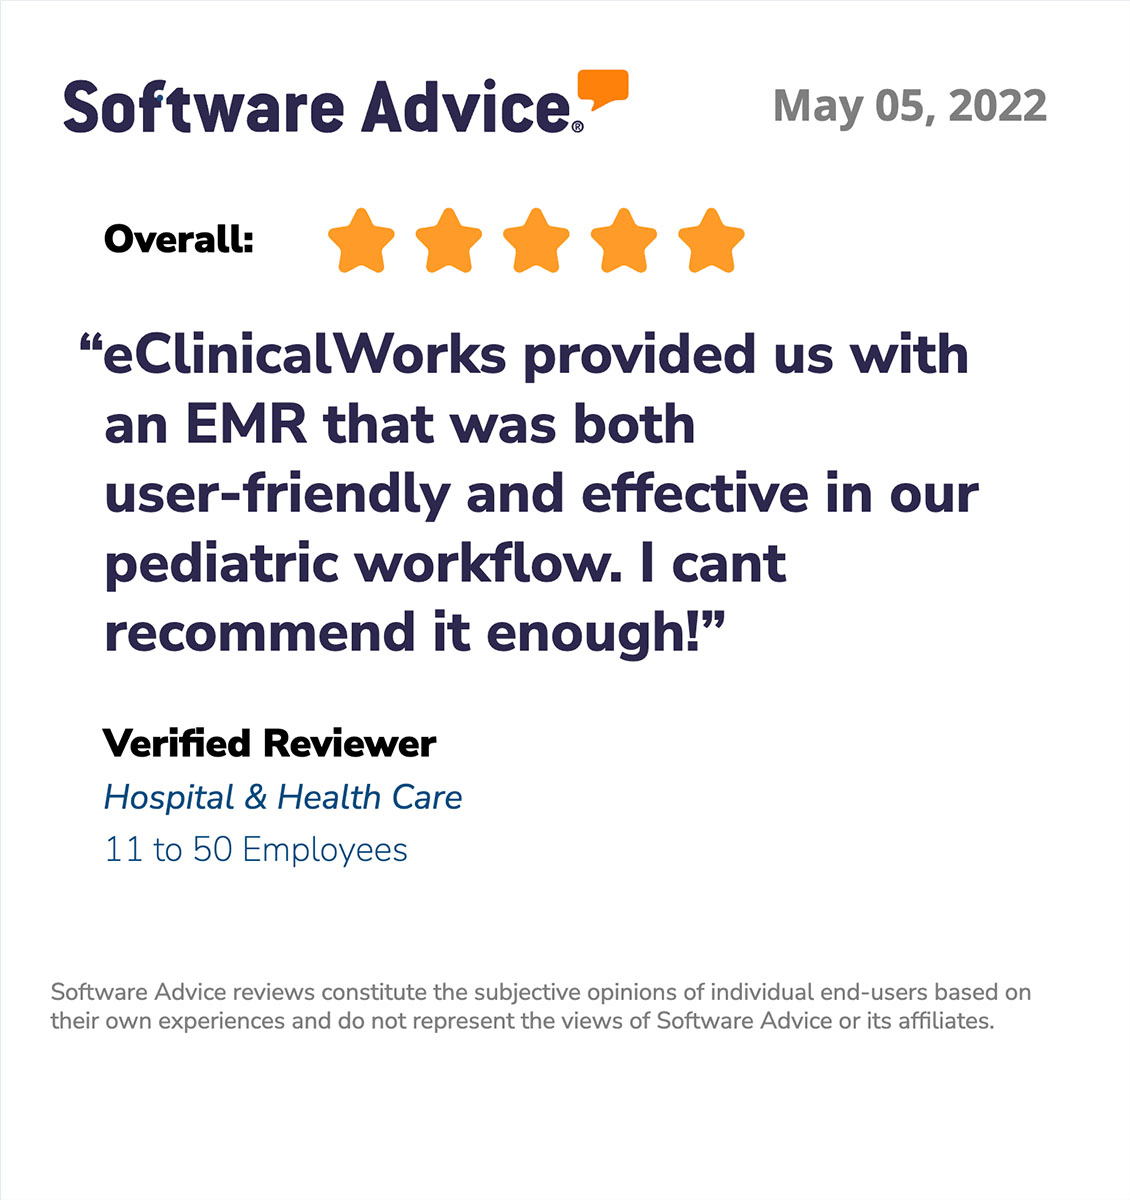 Software Advice review for eClinicalWorks EMR: Overall 5 stars, eClinicalWorks provided us with an EMR that was both user-friendly and effective in our pediatric workflow. I cant recommend it enough!